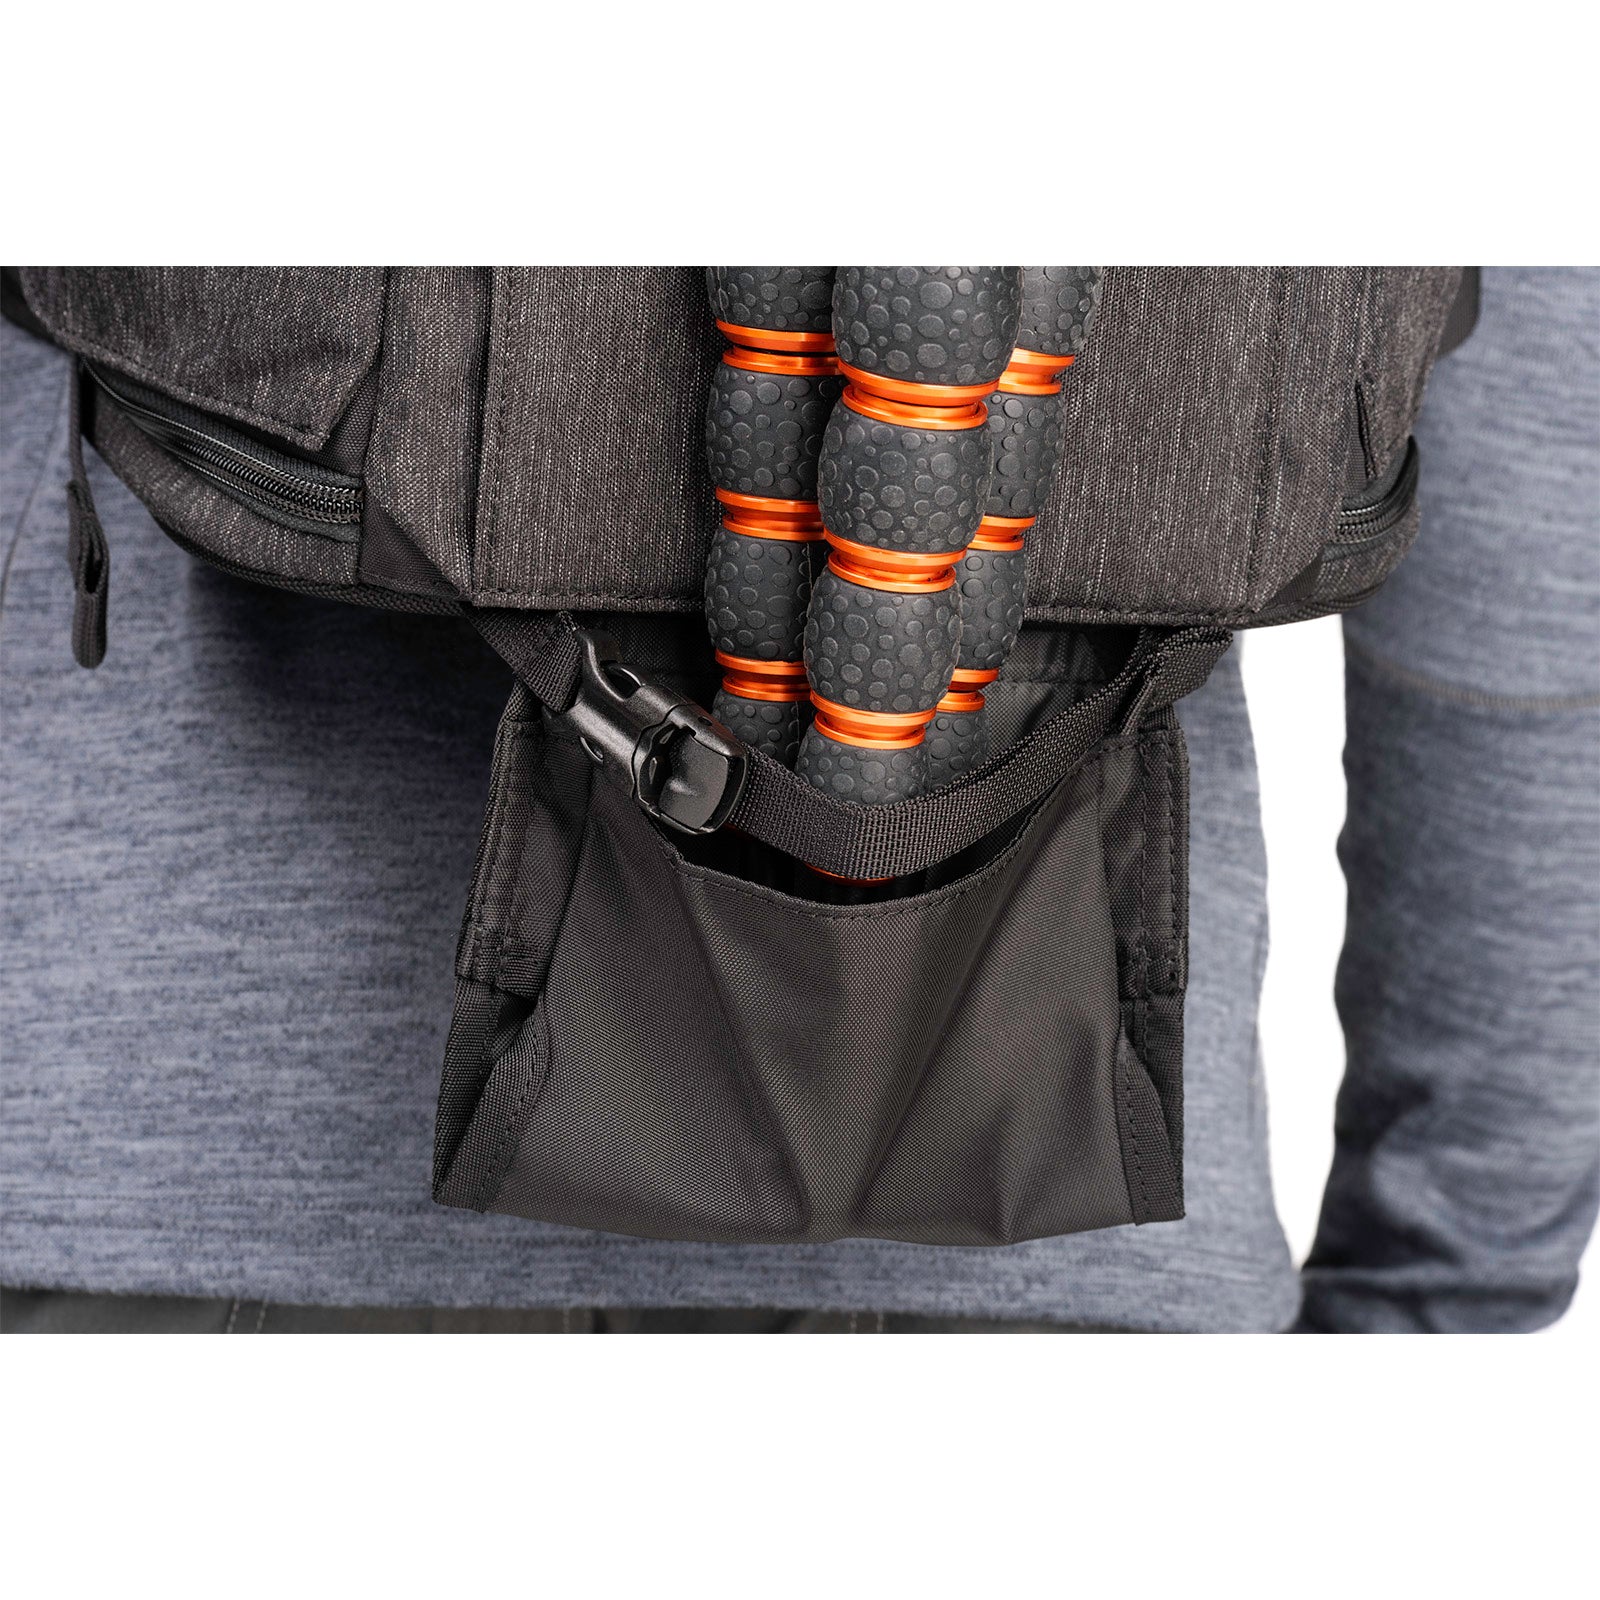 Tuck-away tripod straps and cup system